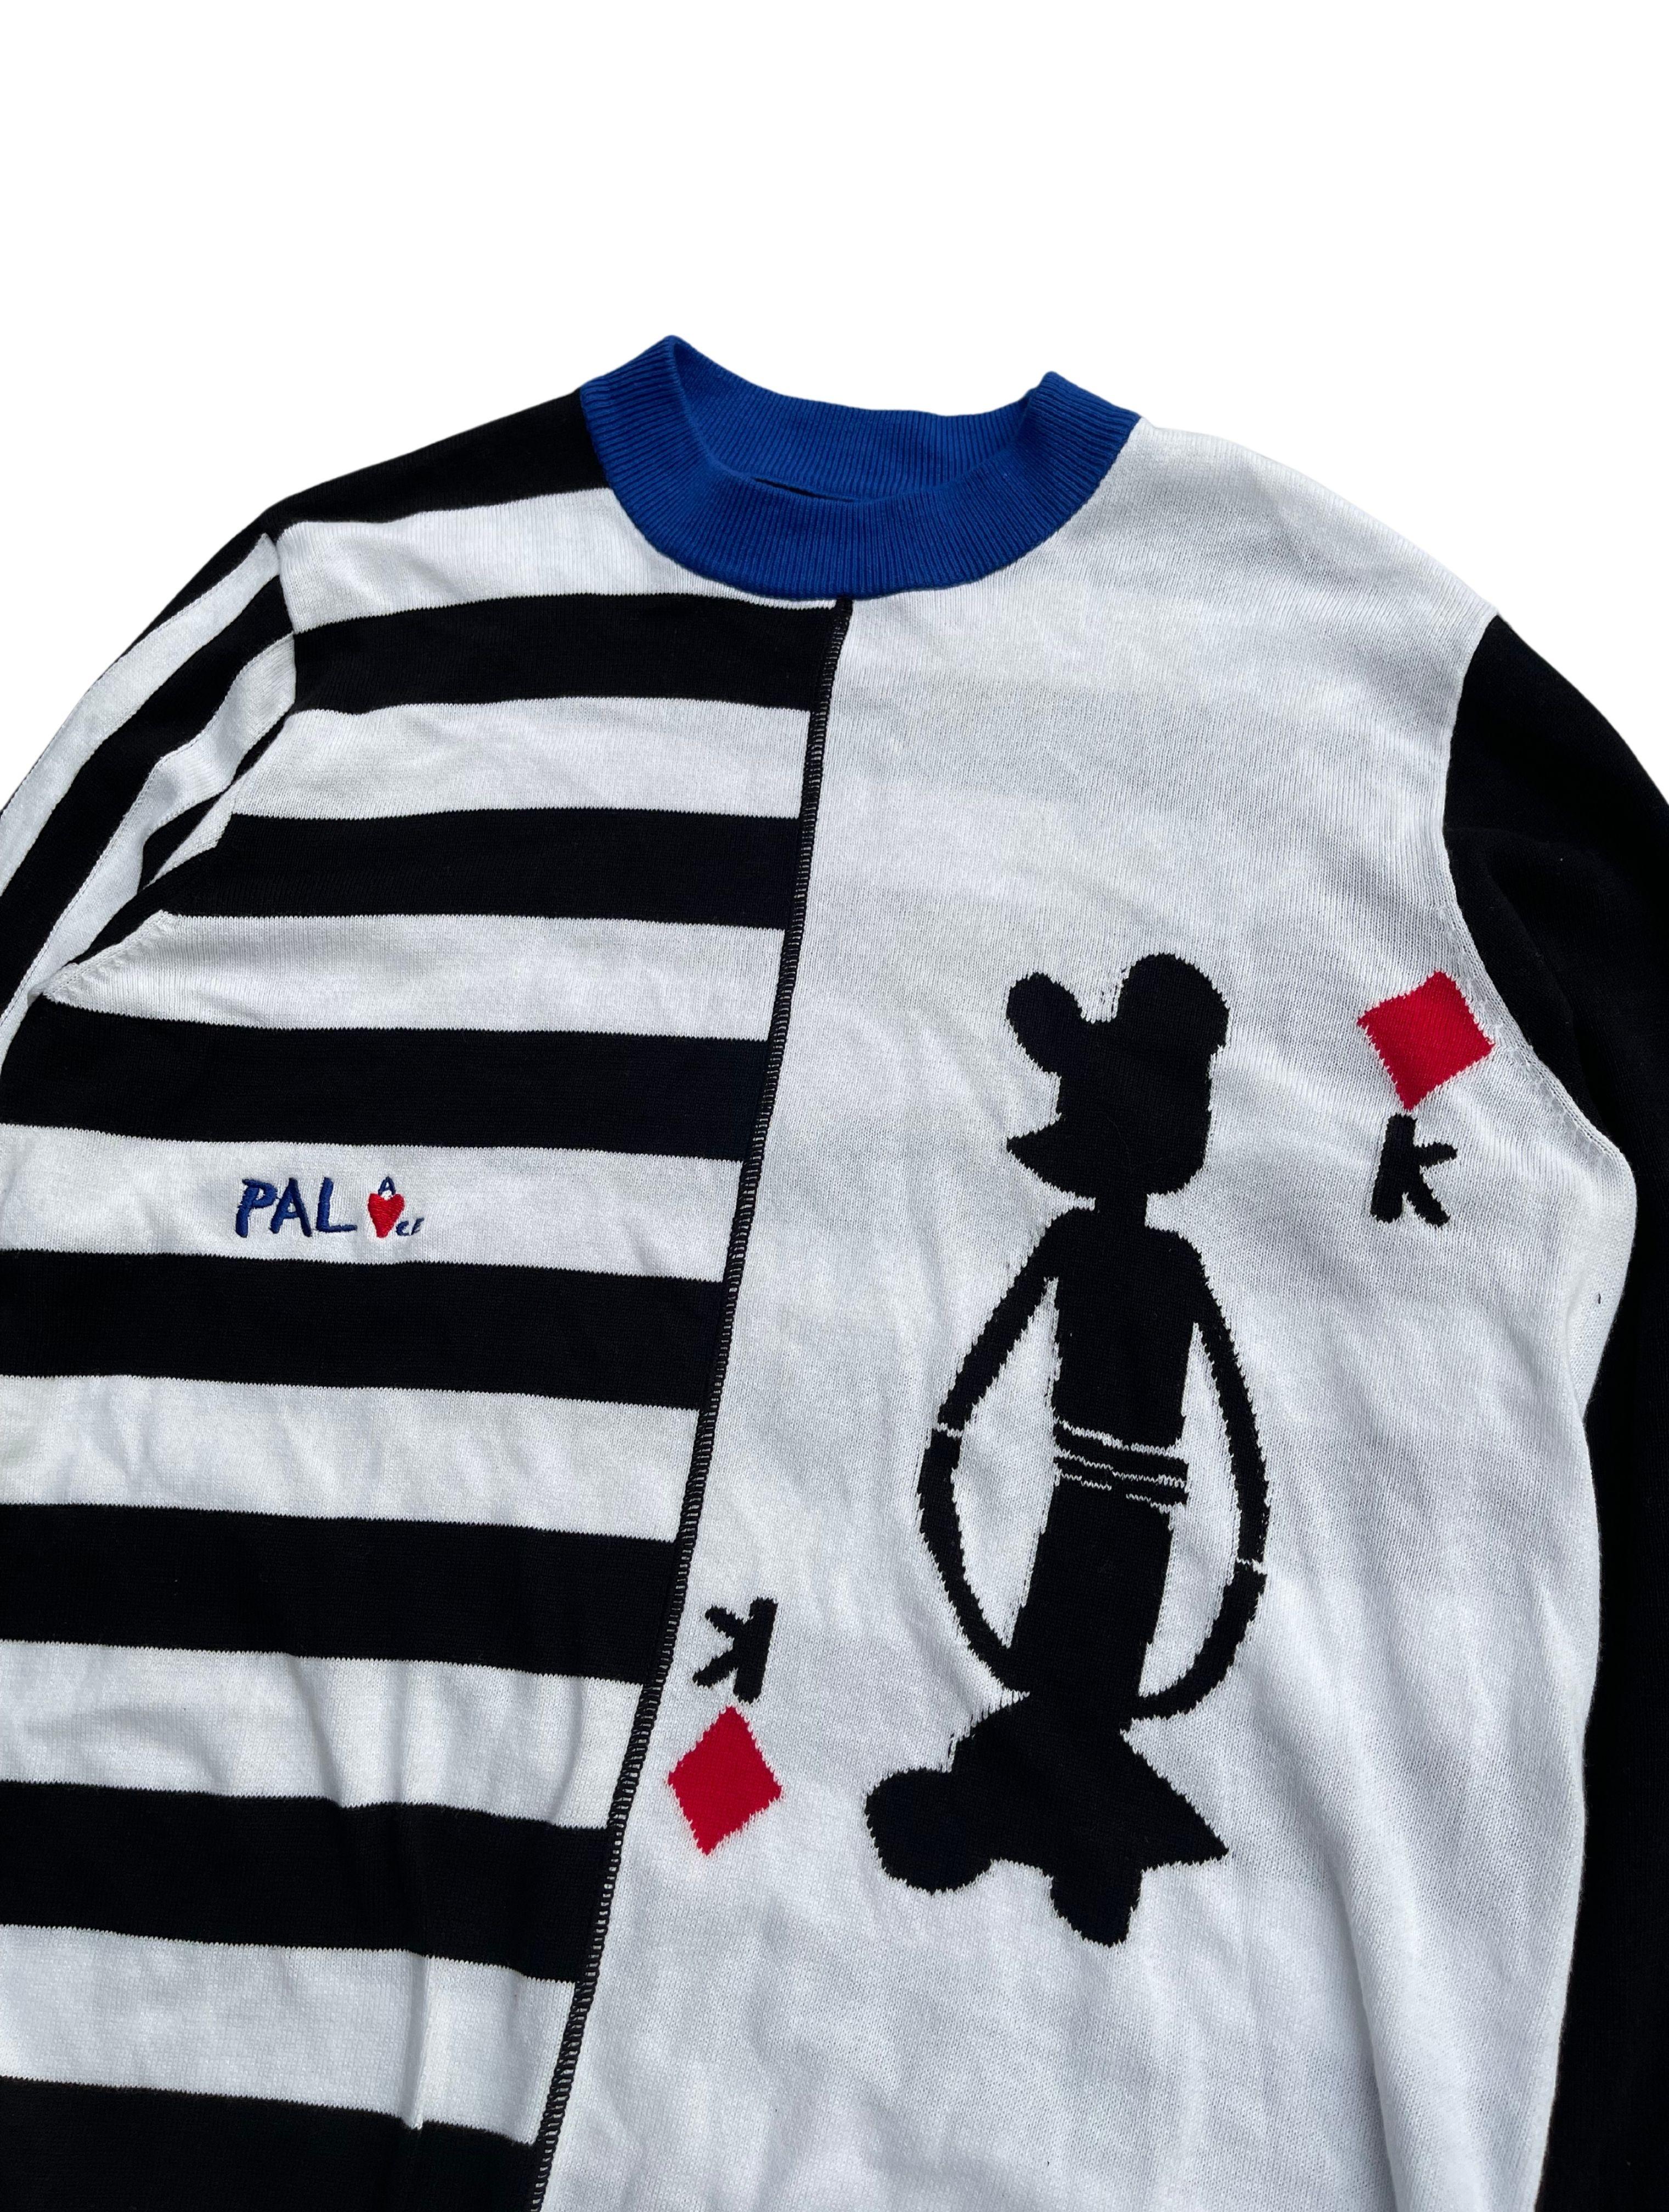 Palace has tapped Moroccan/French visionary artist/designer Jean Charles de Castelbajac for a Spring/Summer 2020 capsule collection.

Coming together once again, the special range builds on JCC’s signature poetic writings and artistic illustrations